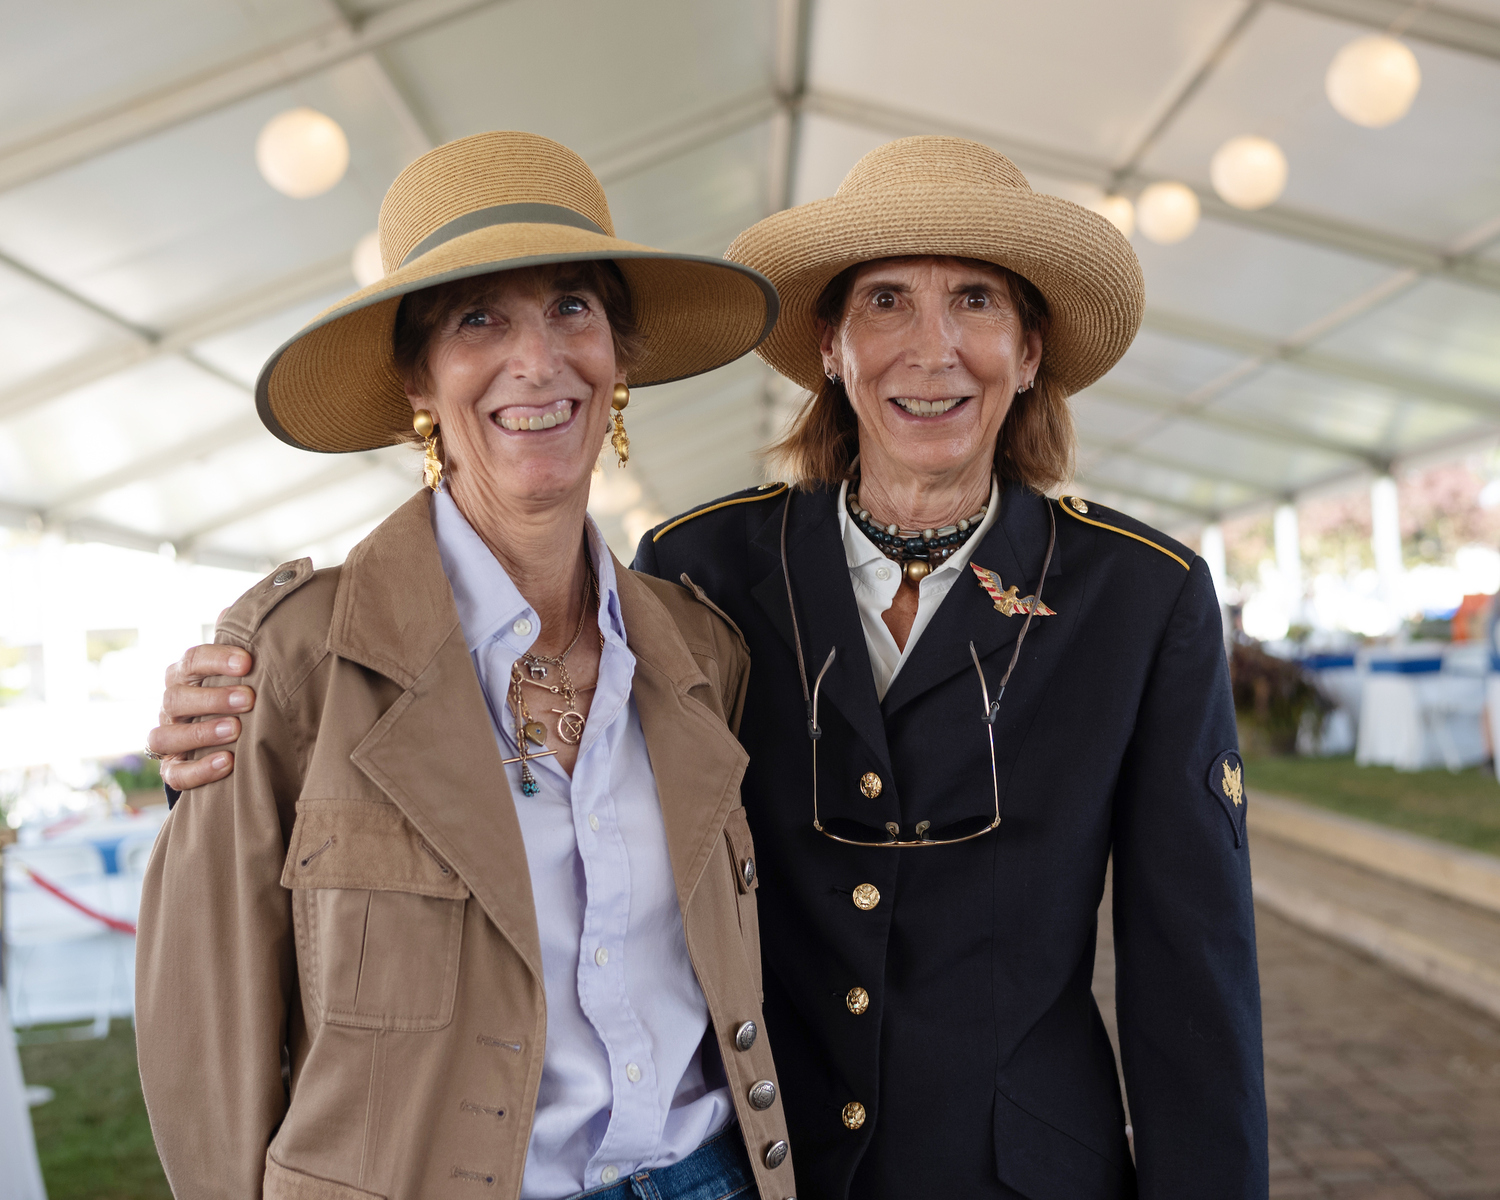 Nancy Banfield and Sue Ellen Marder O'Connor pose for a photos during the $10,000 Marders Local Hunter Derby on Sunday, August 27, 2023 in Bridgehampton, New York. LORI HAWKINS